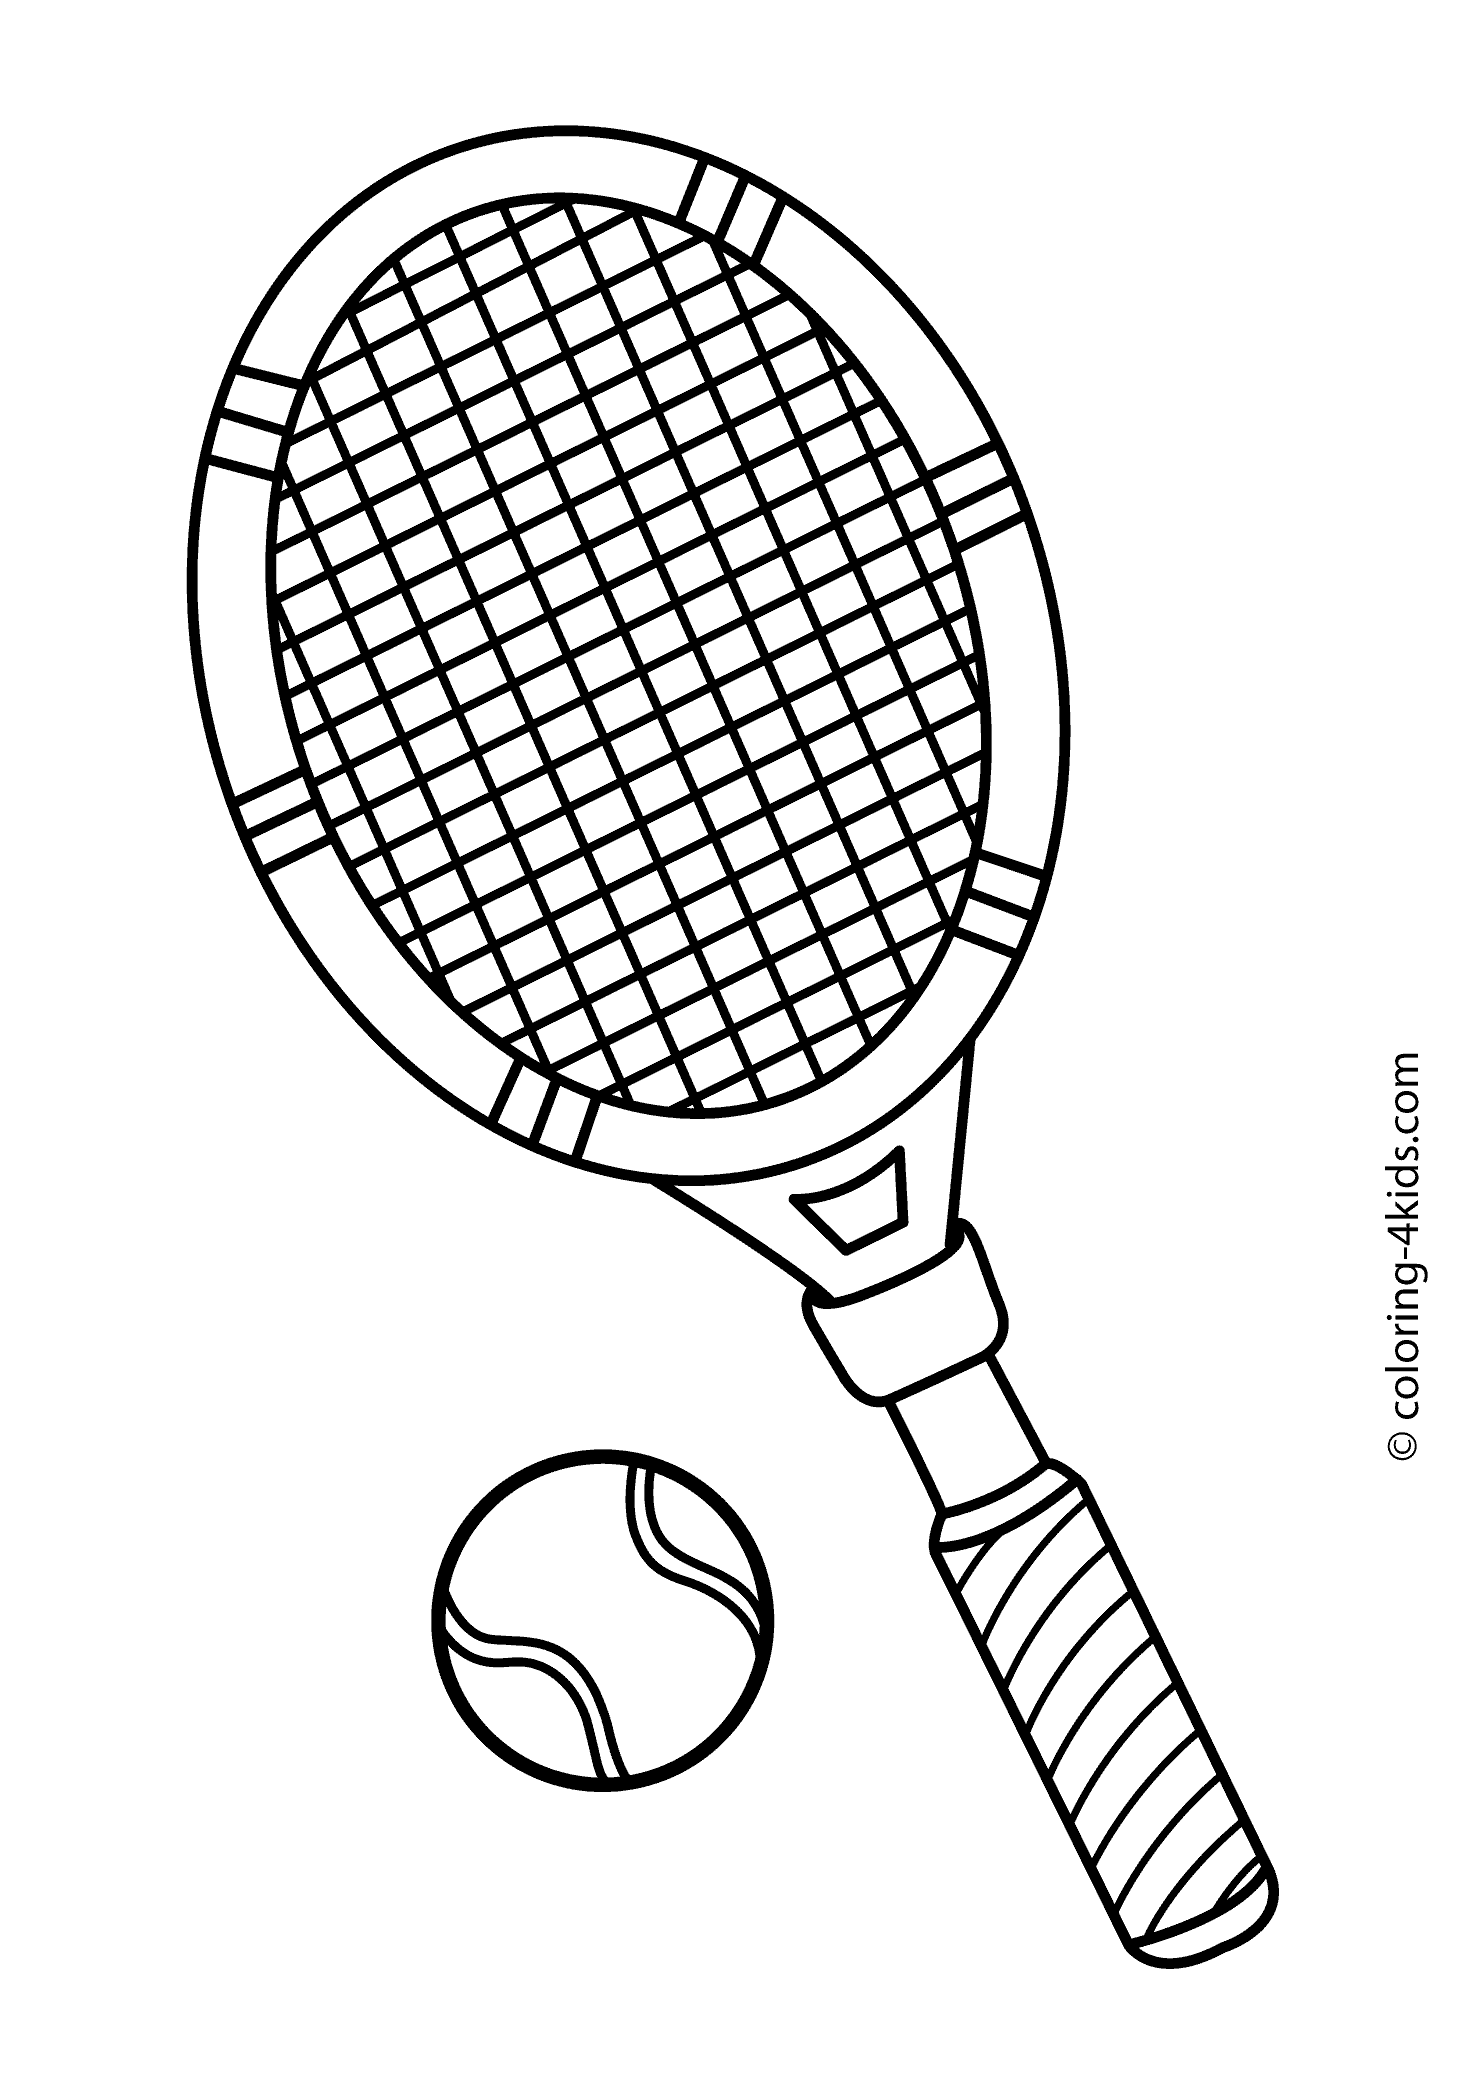 Tennis sport coloring page for kids, printable free | Sports coloring pages,  Coloring pages for kids, Tennis crafts